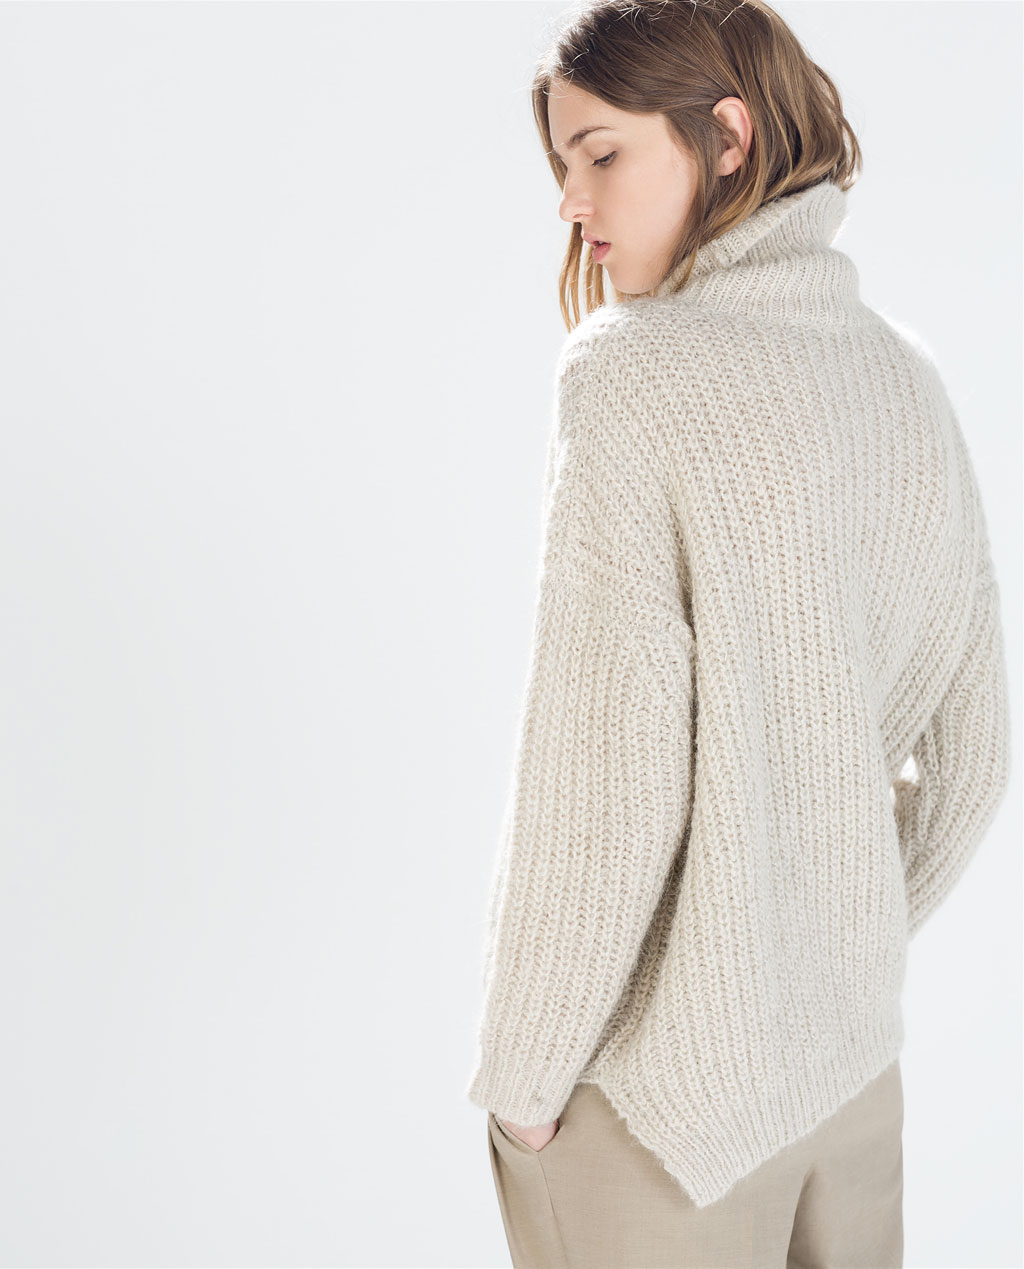 Weekly Obsession- Zara Square Turtleneck Knit